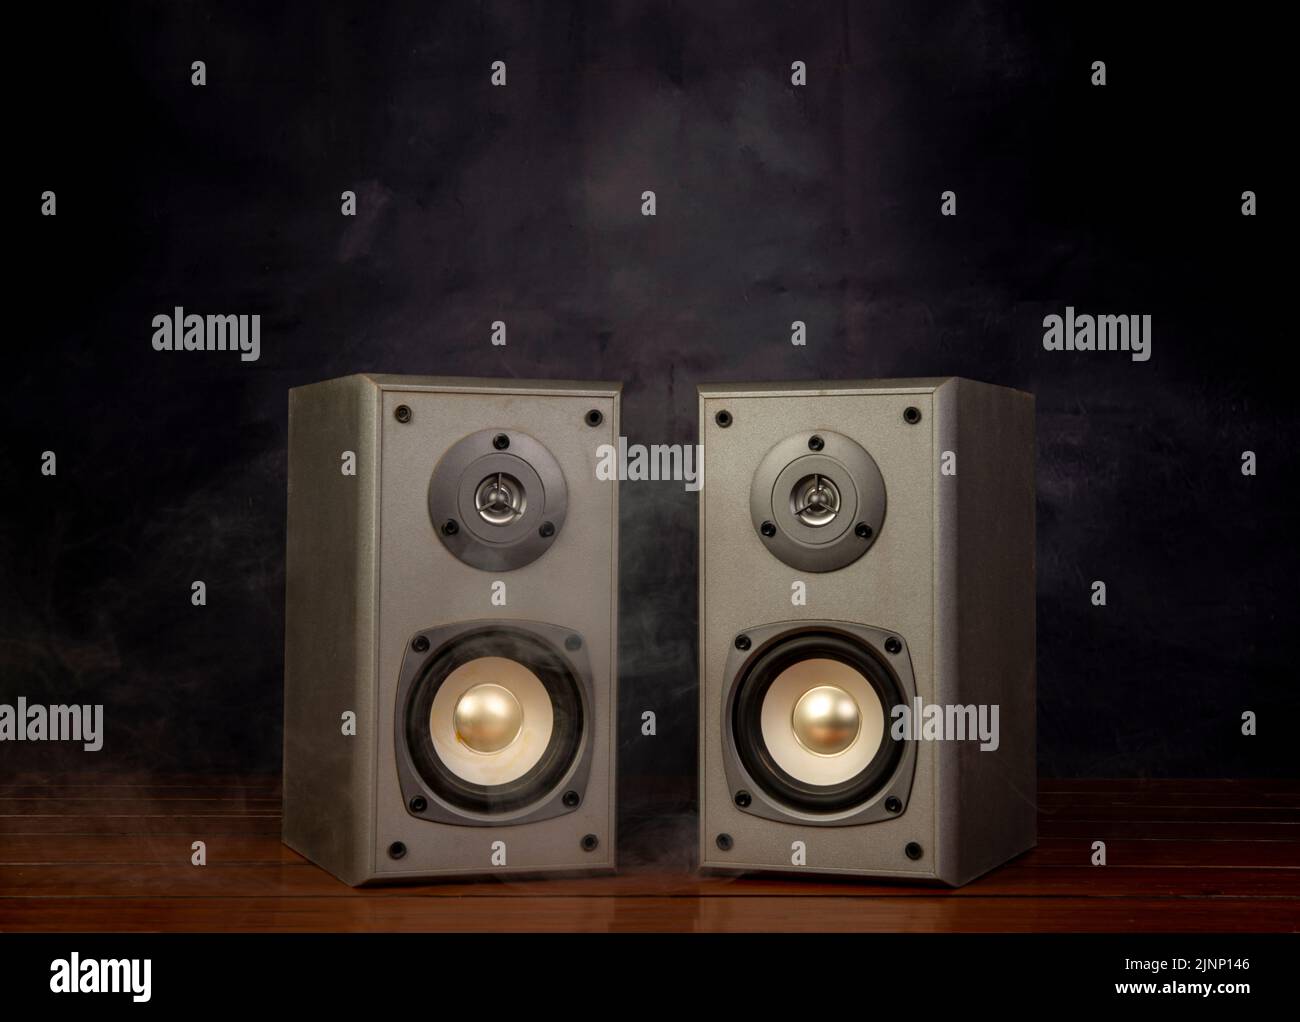 Two audio speakers with smoke in dark background room. Stock Photo